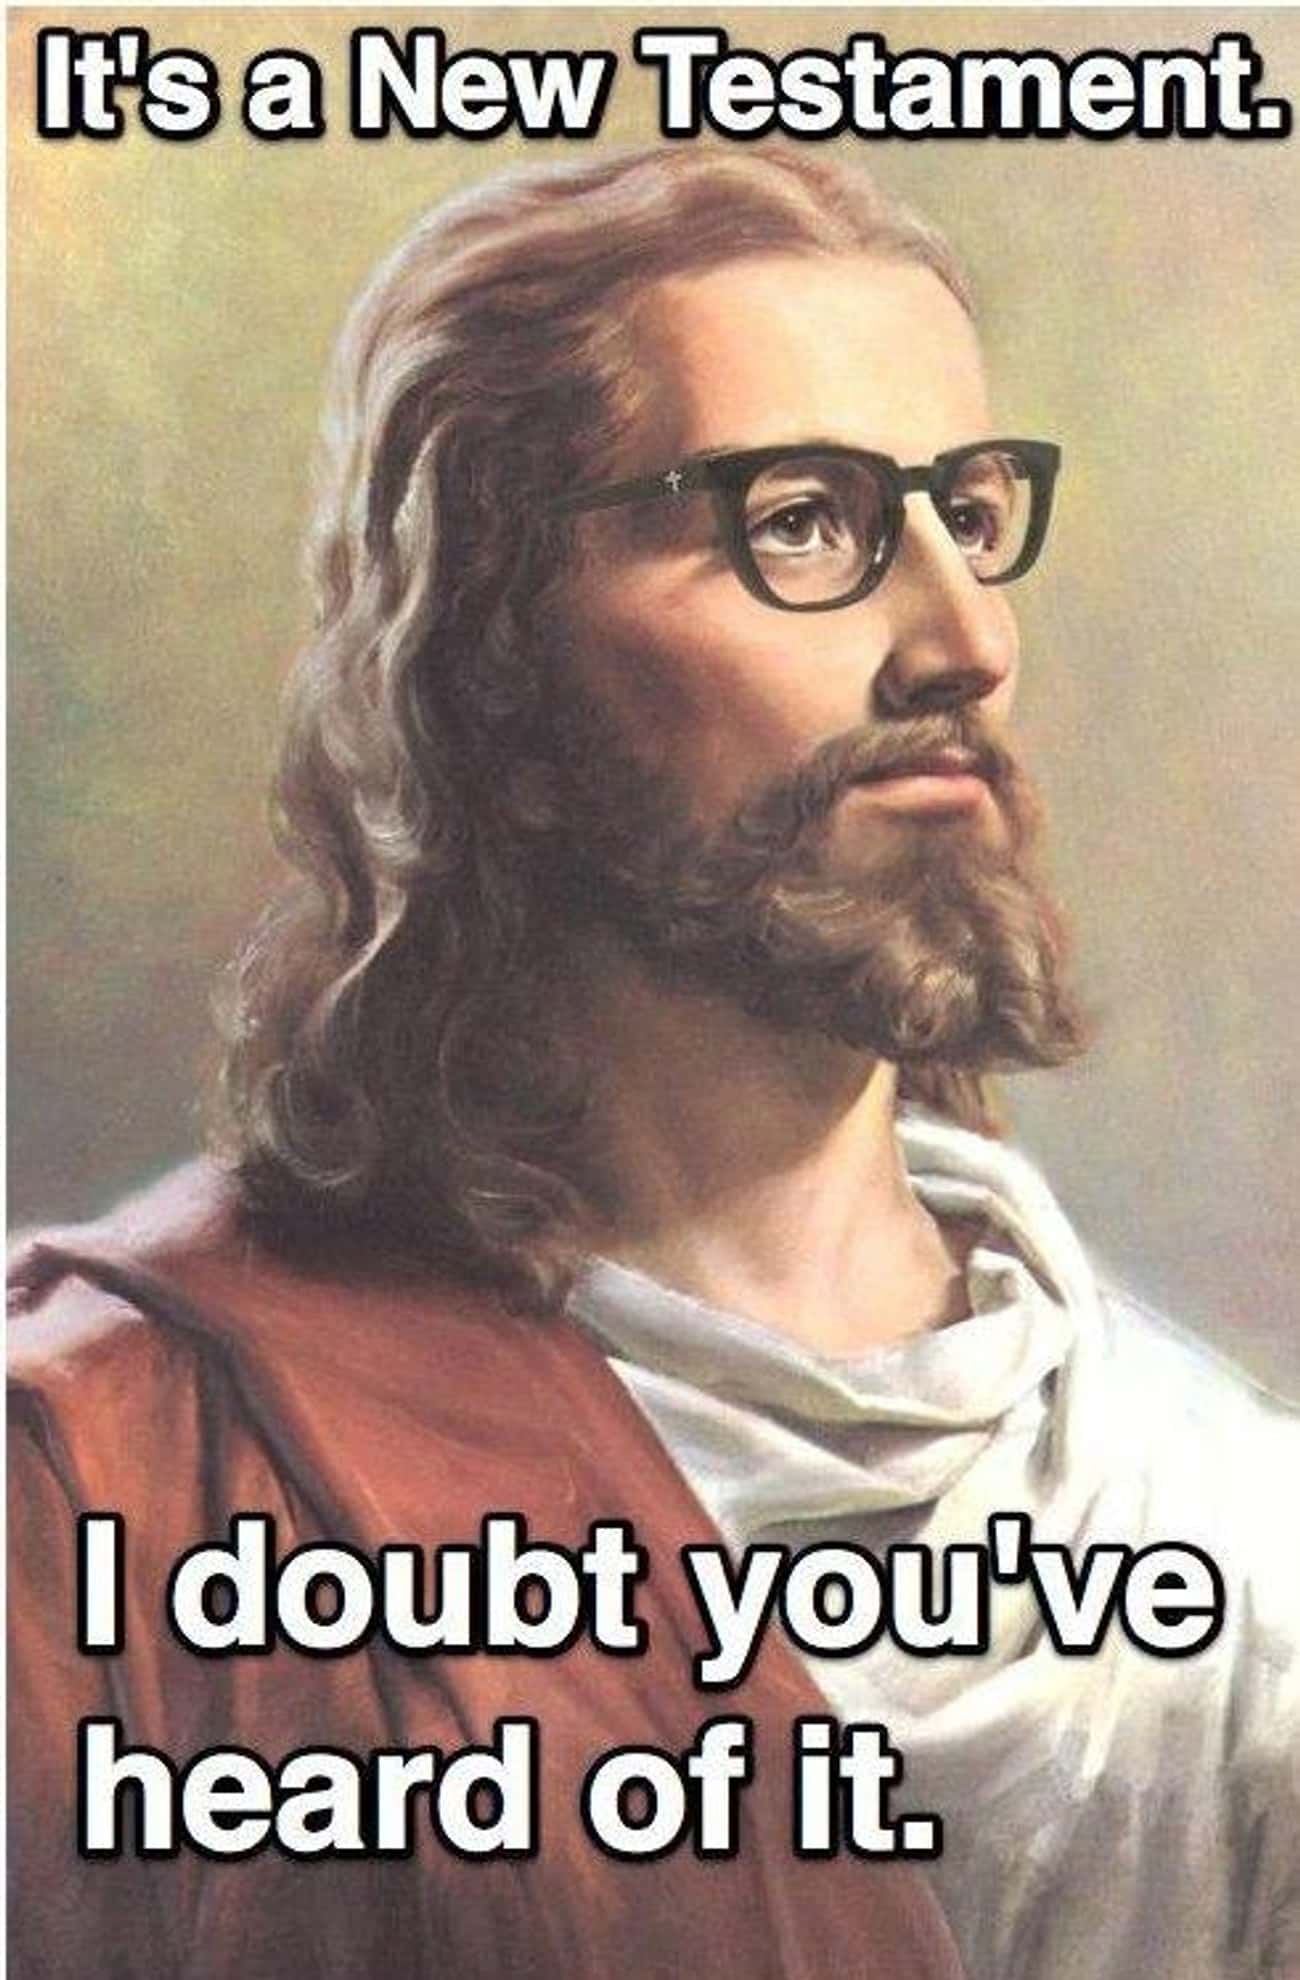 Hipster Jesus Has A Whole New Book For You To Read